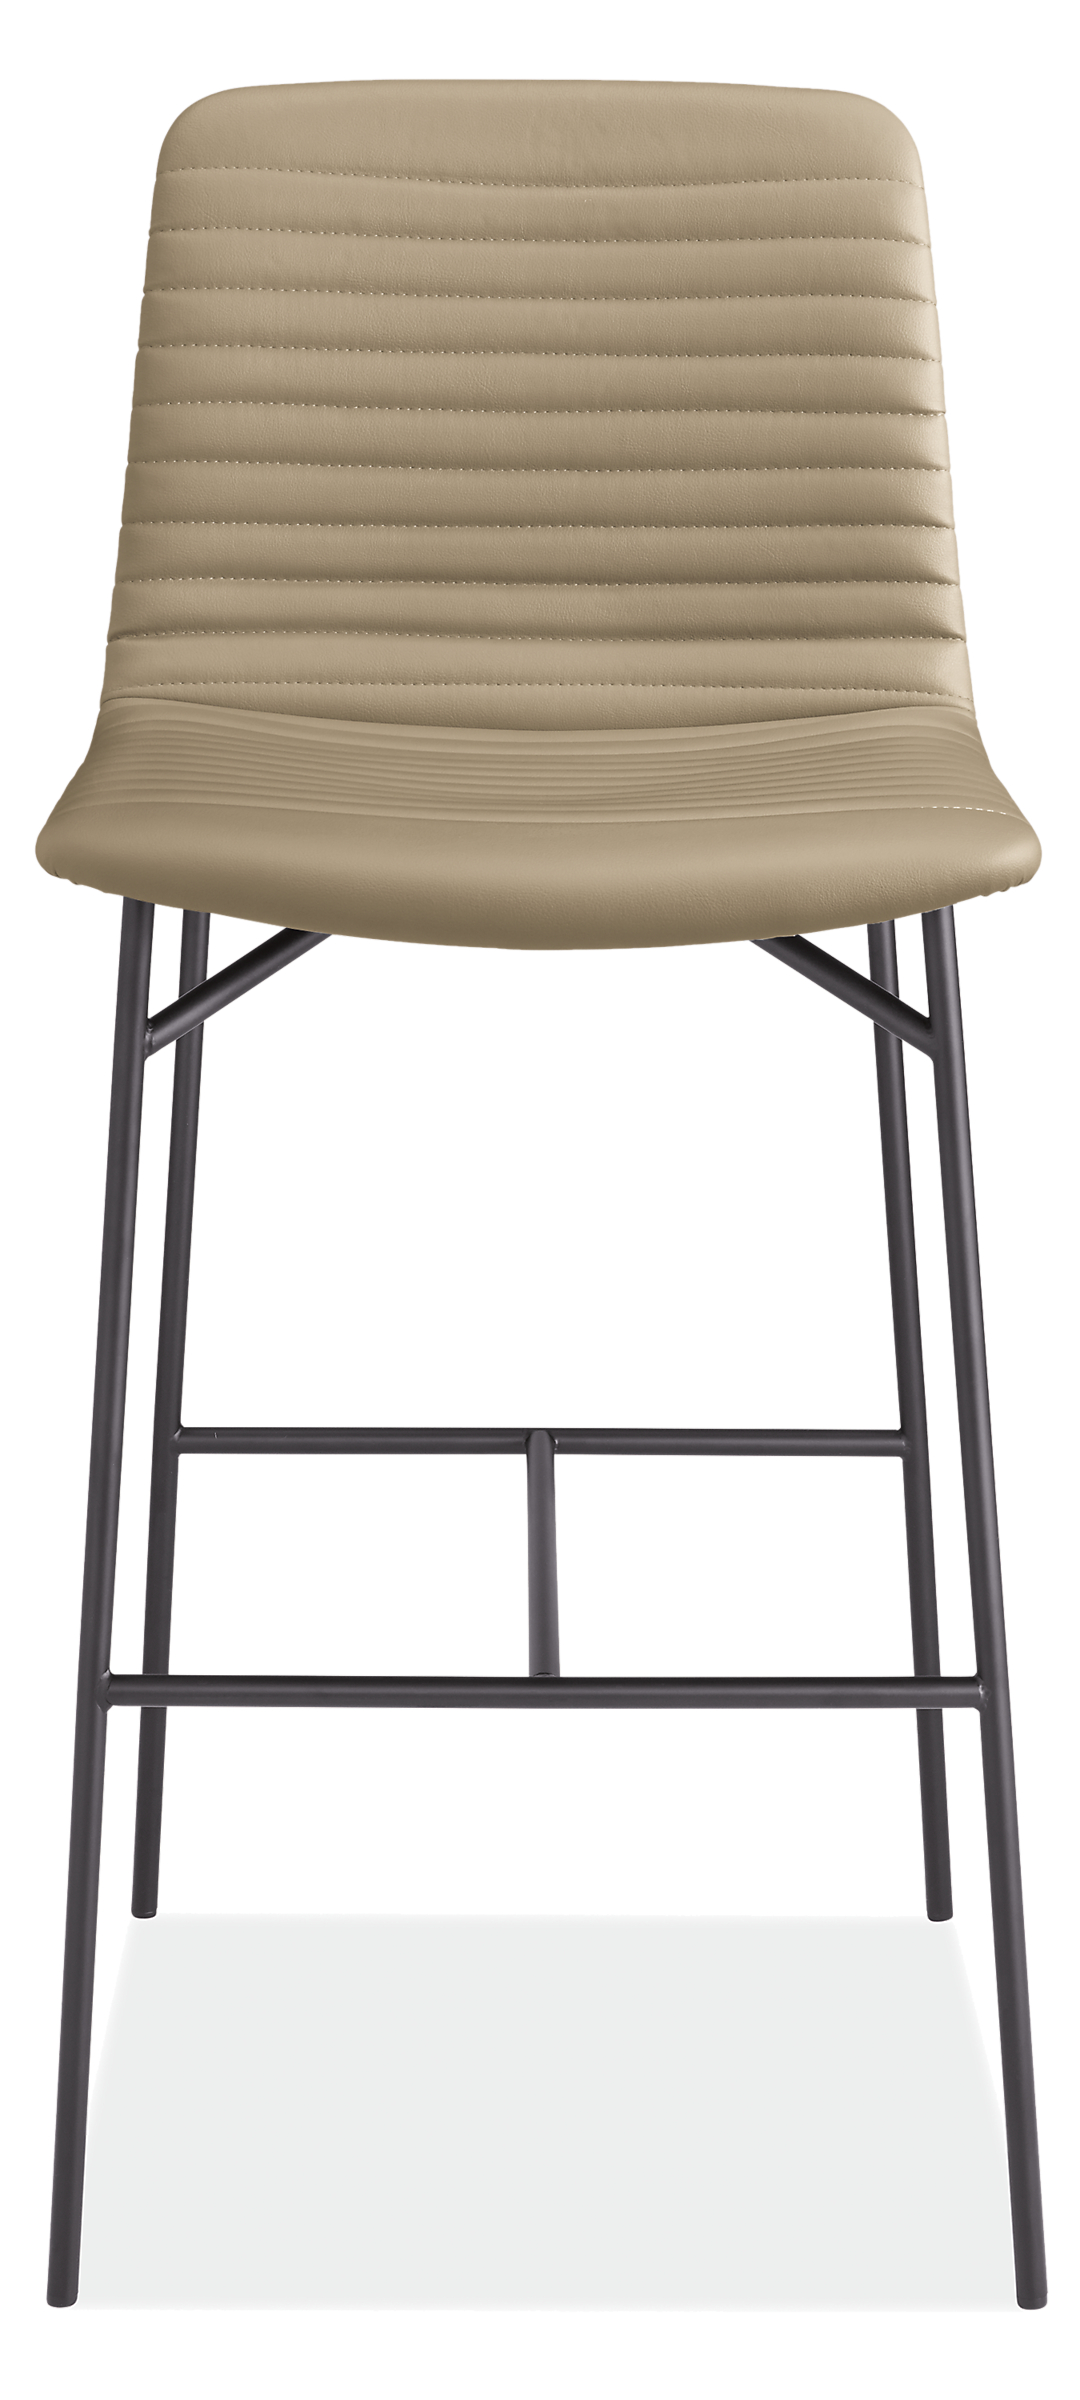 Front view of Cato Bar Stool in Synthetic Leather.